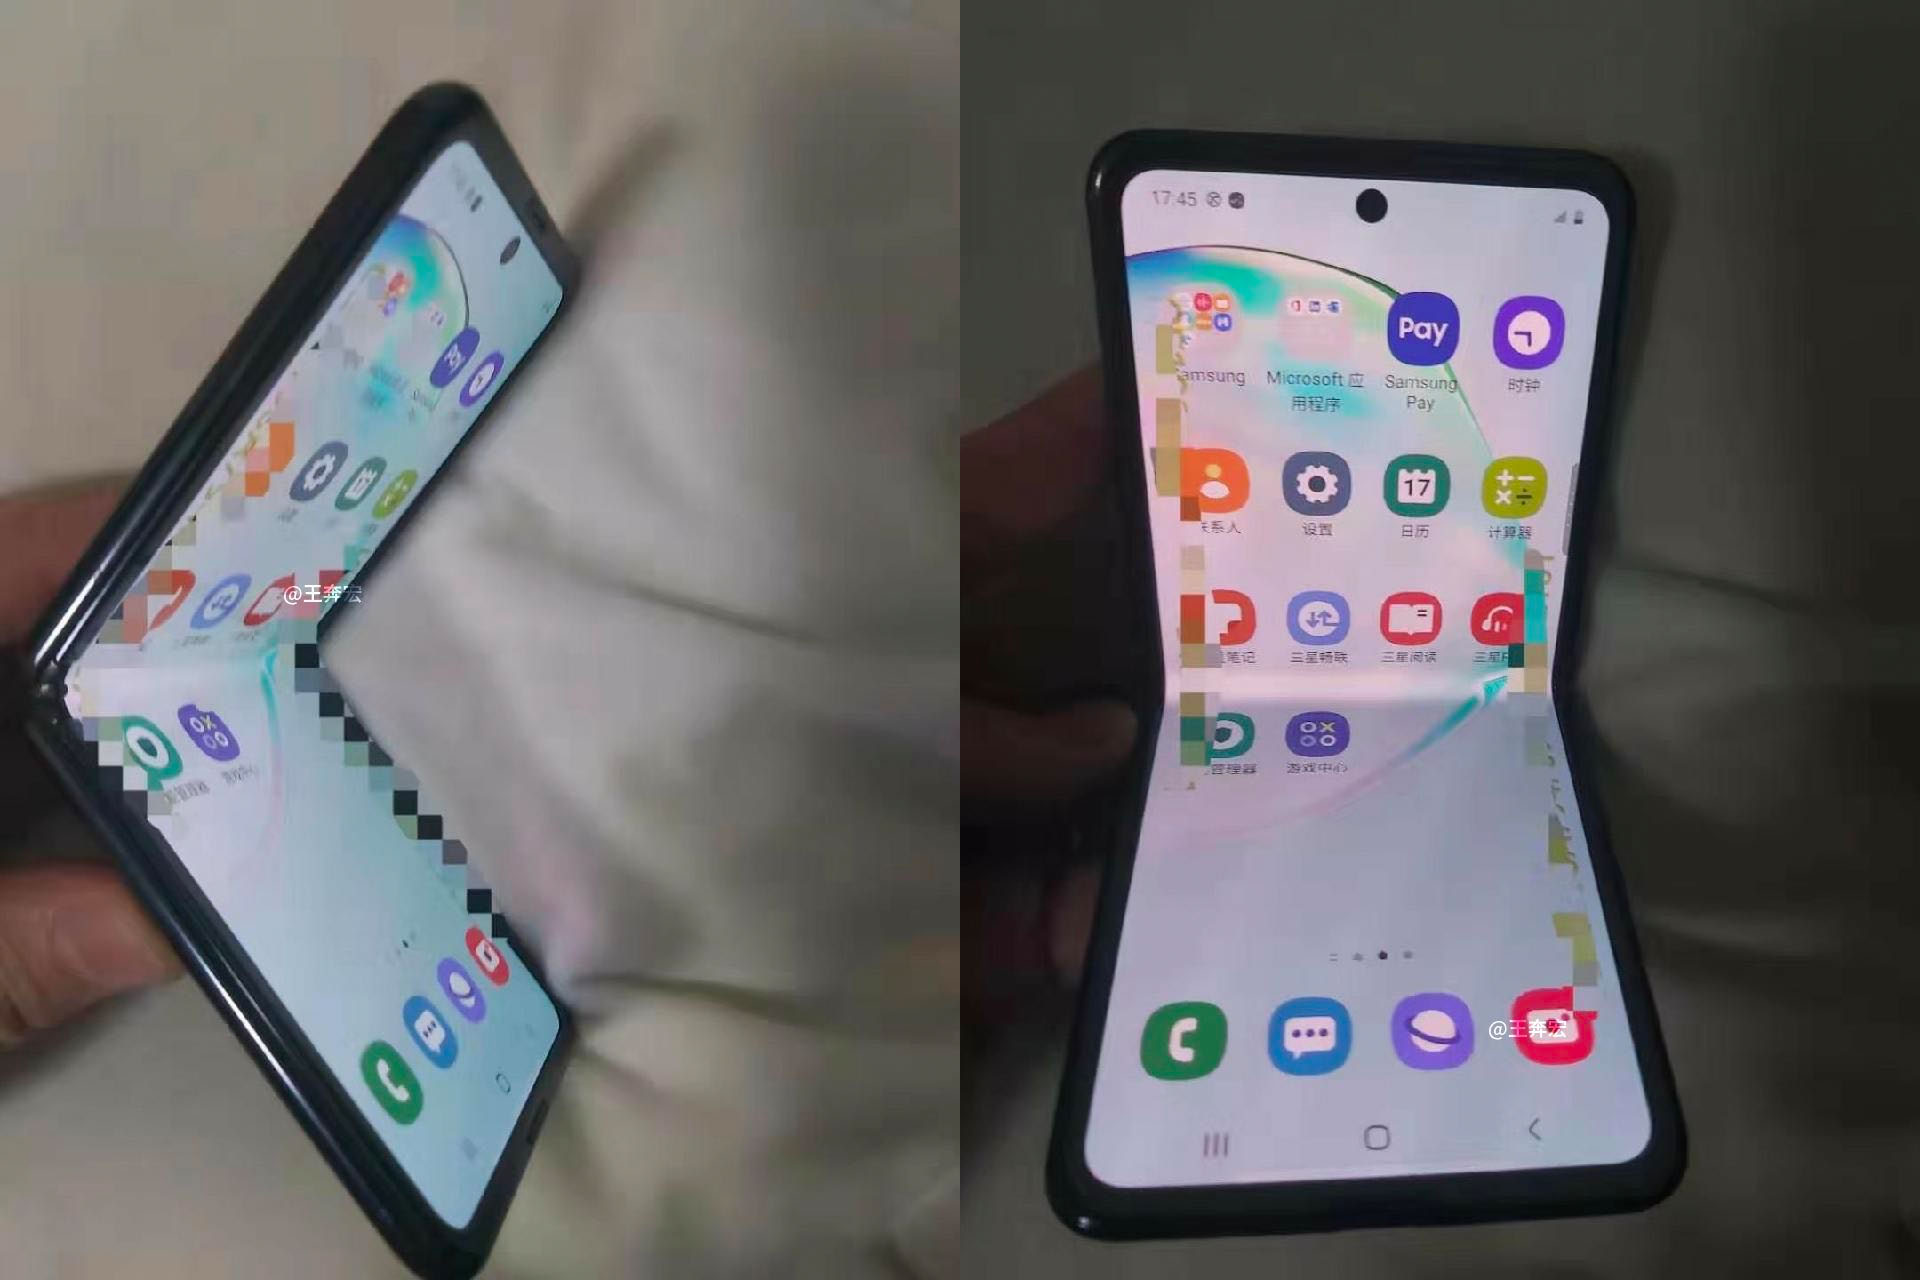 Samsung Galaxy Fold 2 could hit the stores before Galaxy S11 series